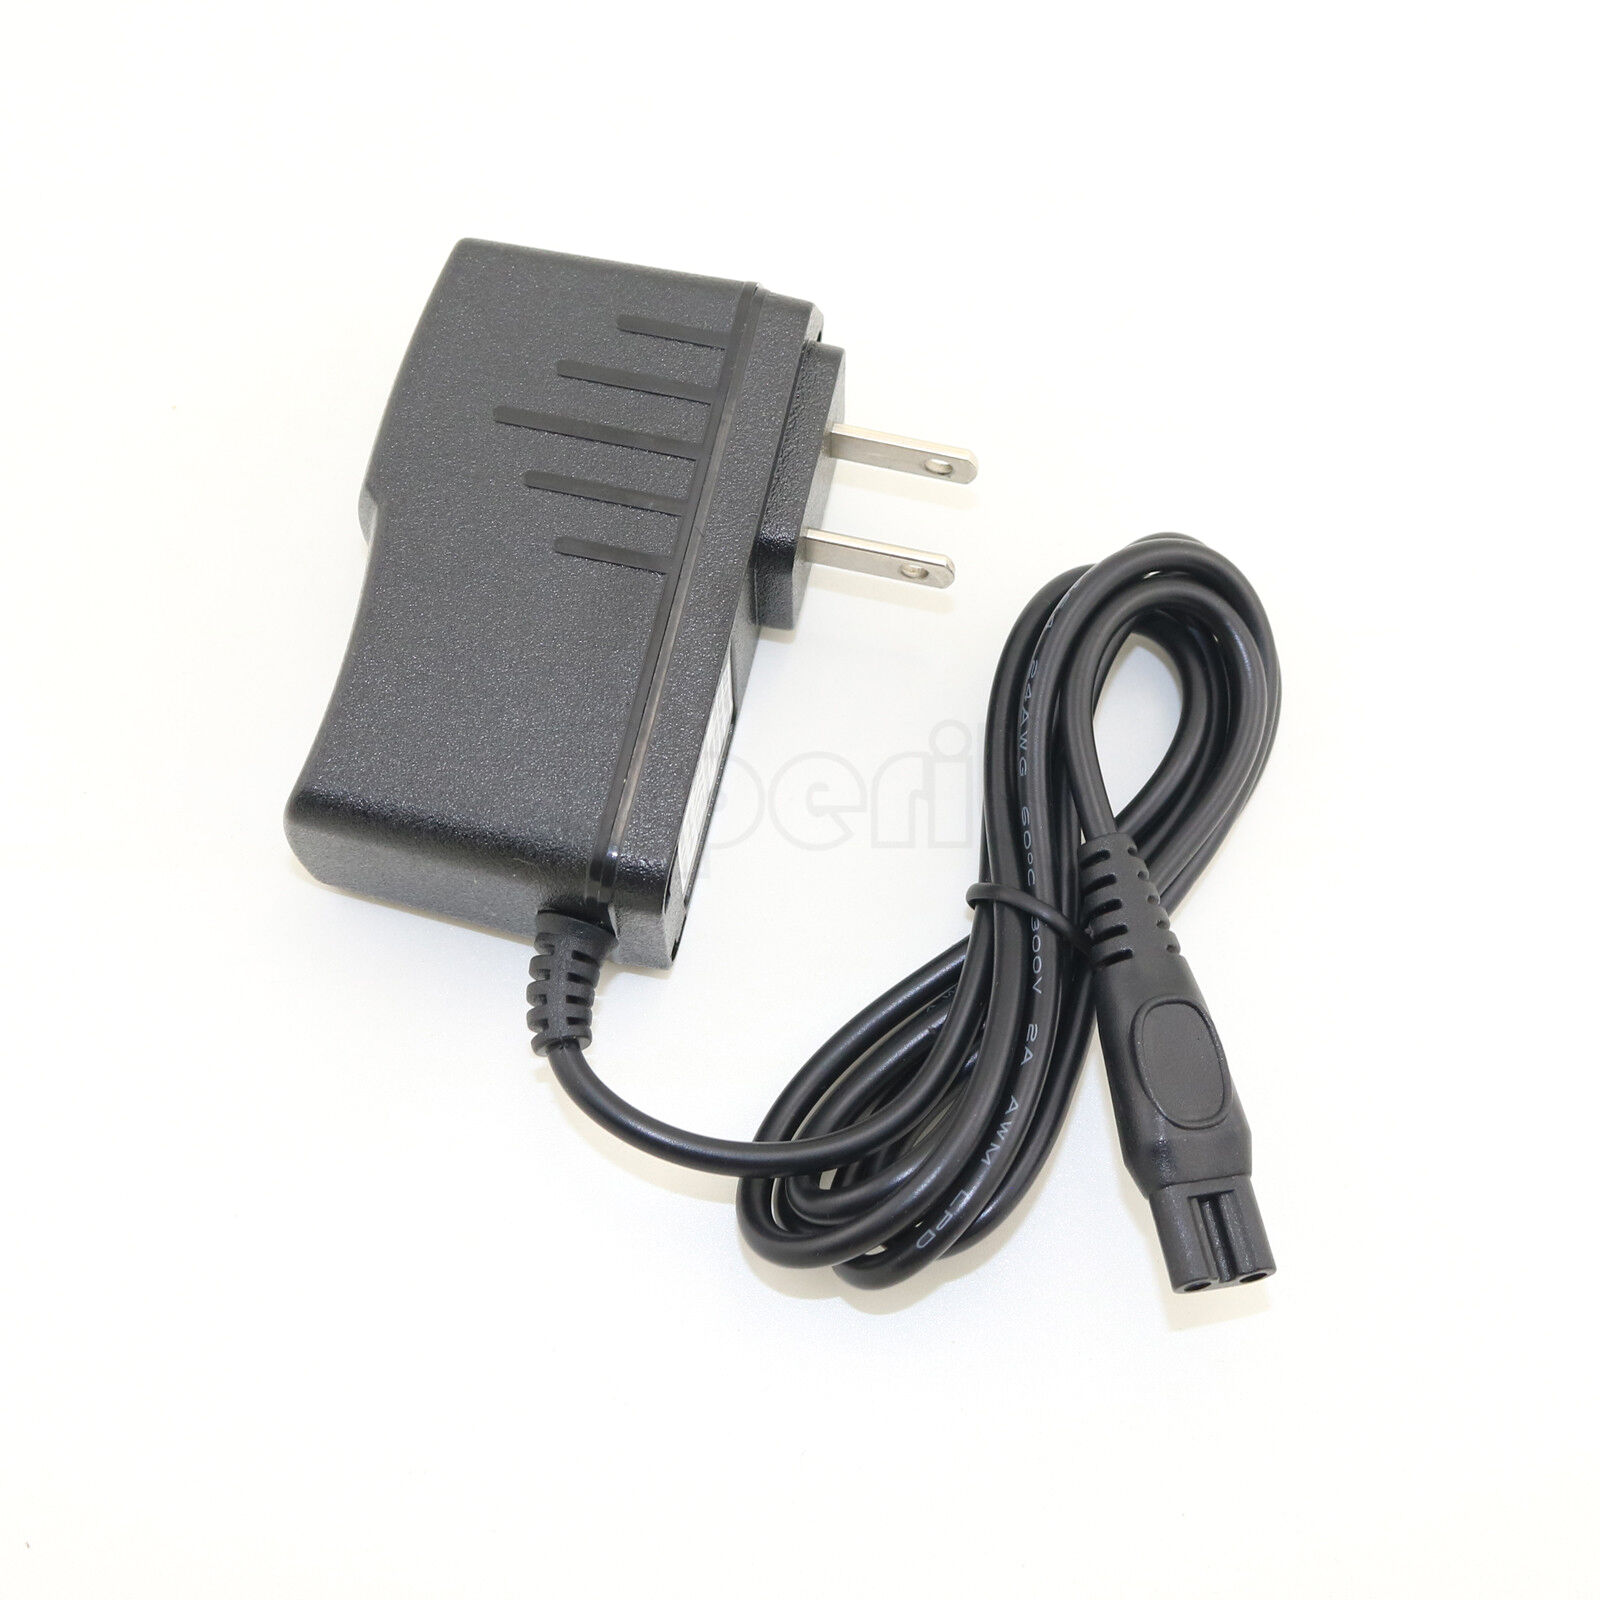 Power Adapter AC Charger Cord For Philips Norelco 9000 9700 Series S9721 AT811 Power Adapter AC Charger Cord For Philip